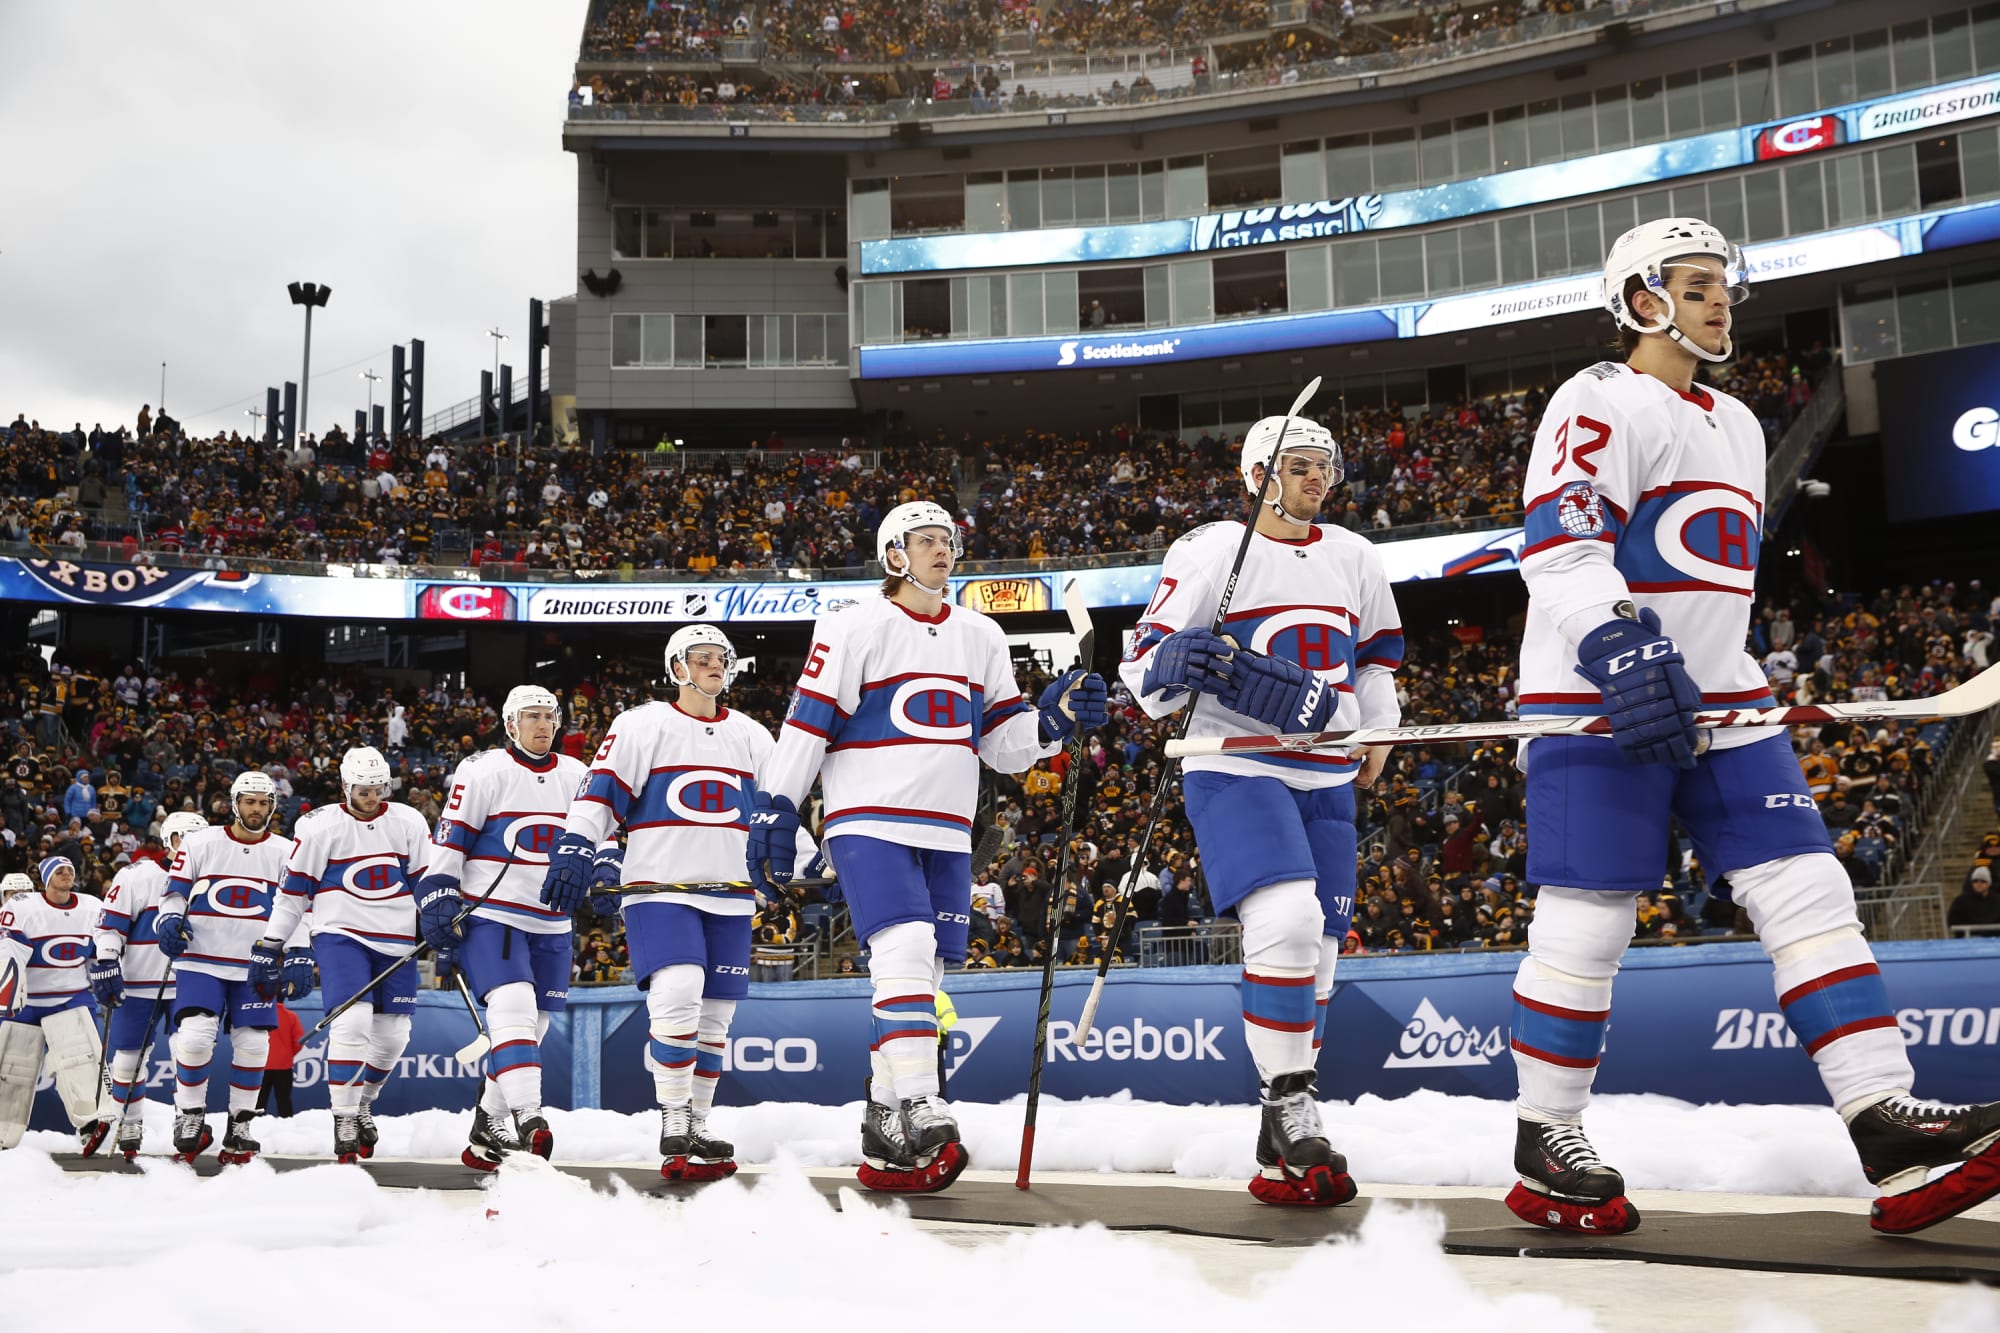 Montreal Canadiens Uniforms for the NHL100 Classic Game